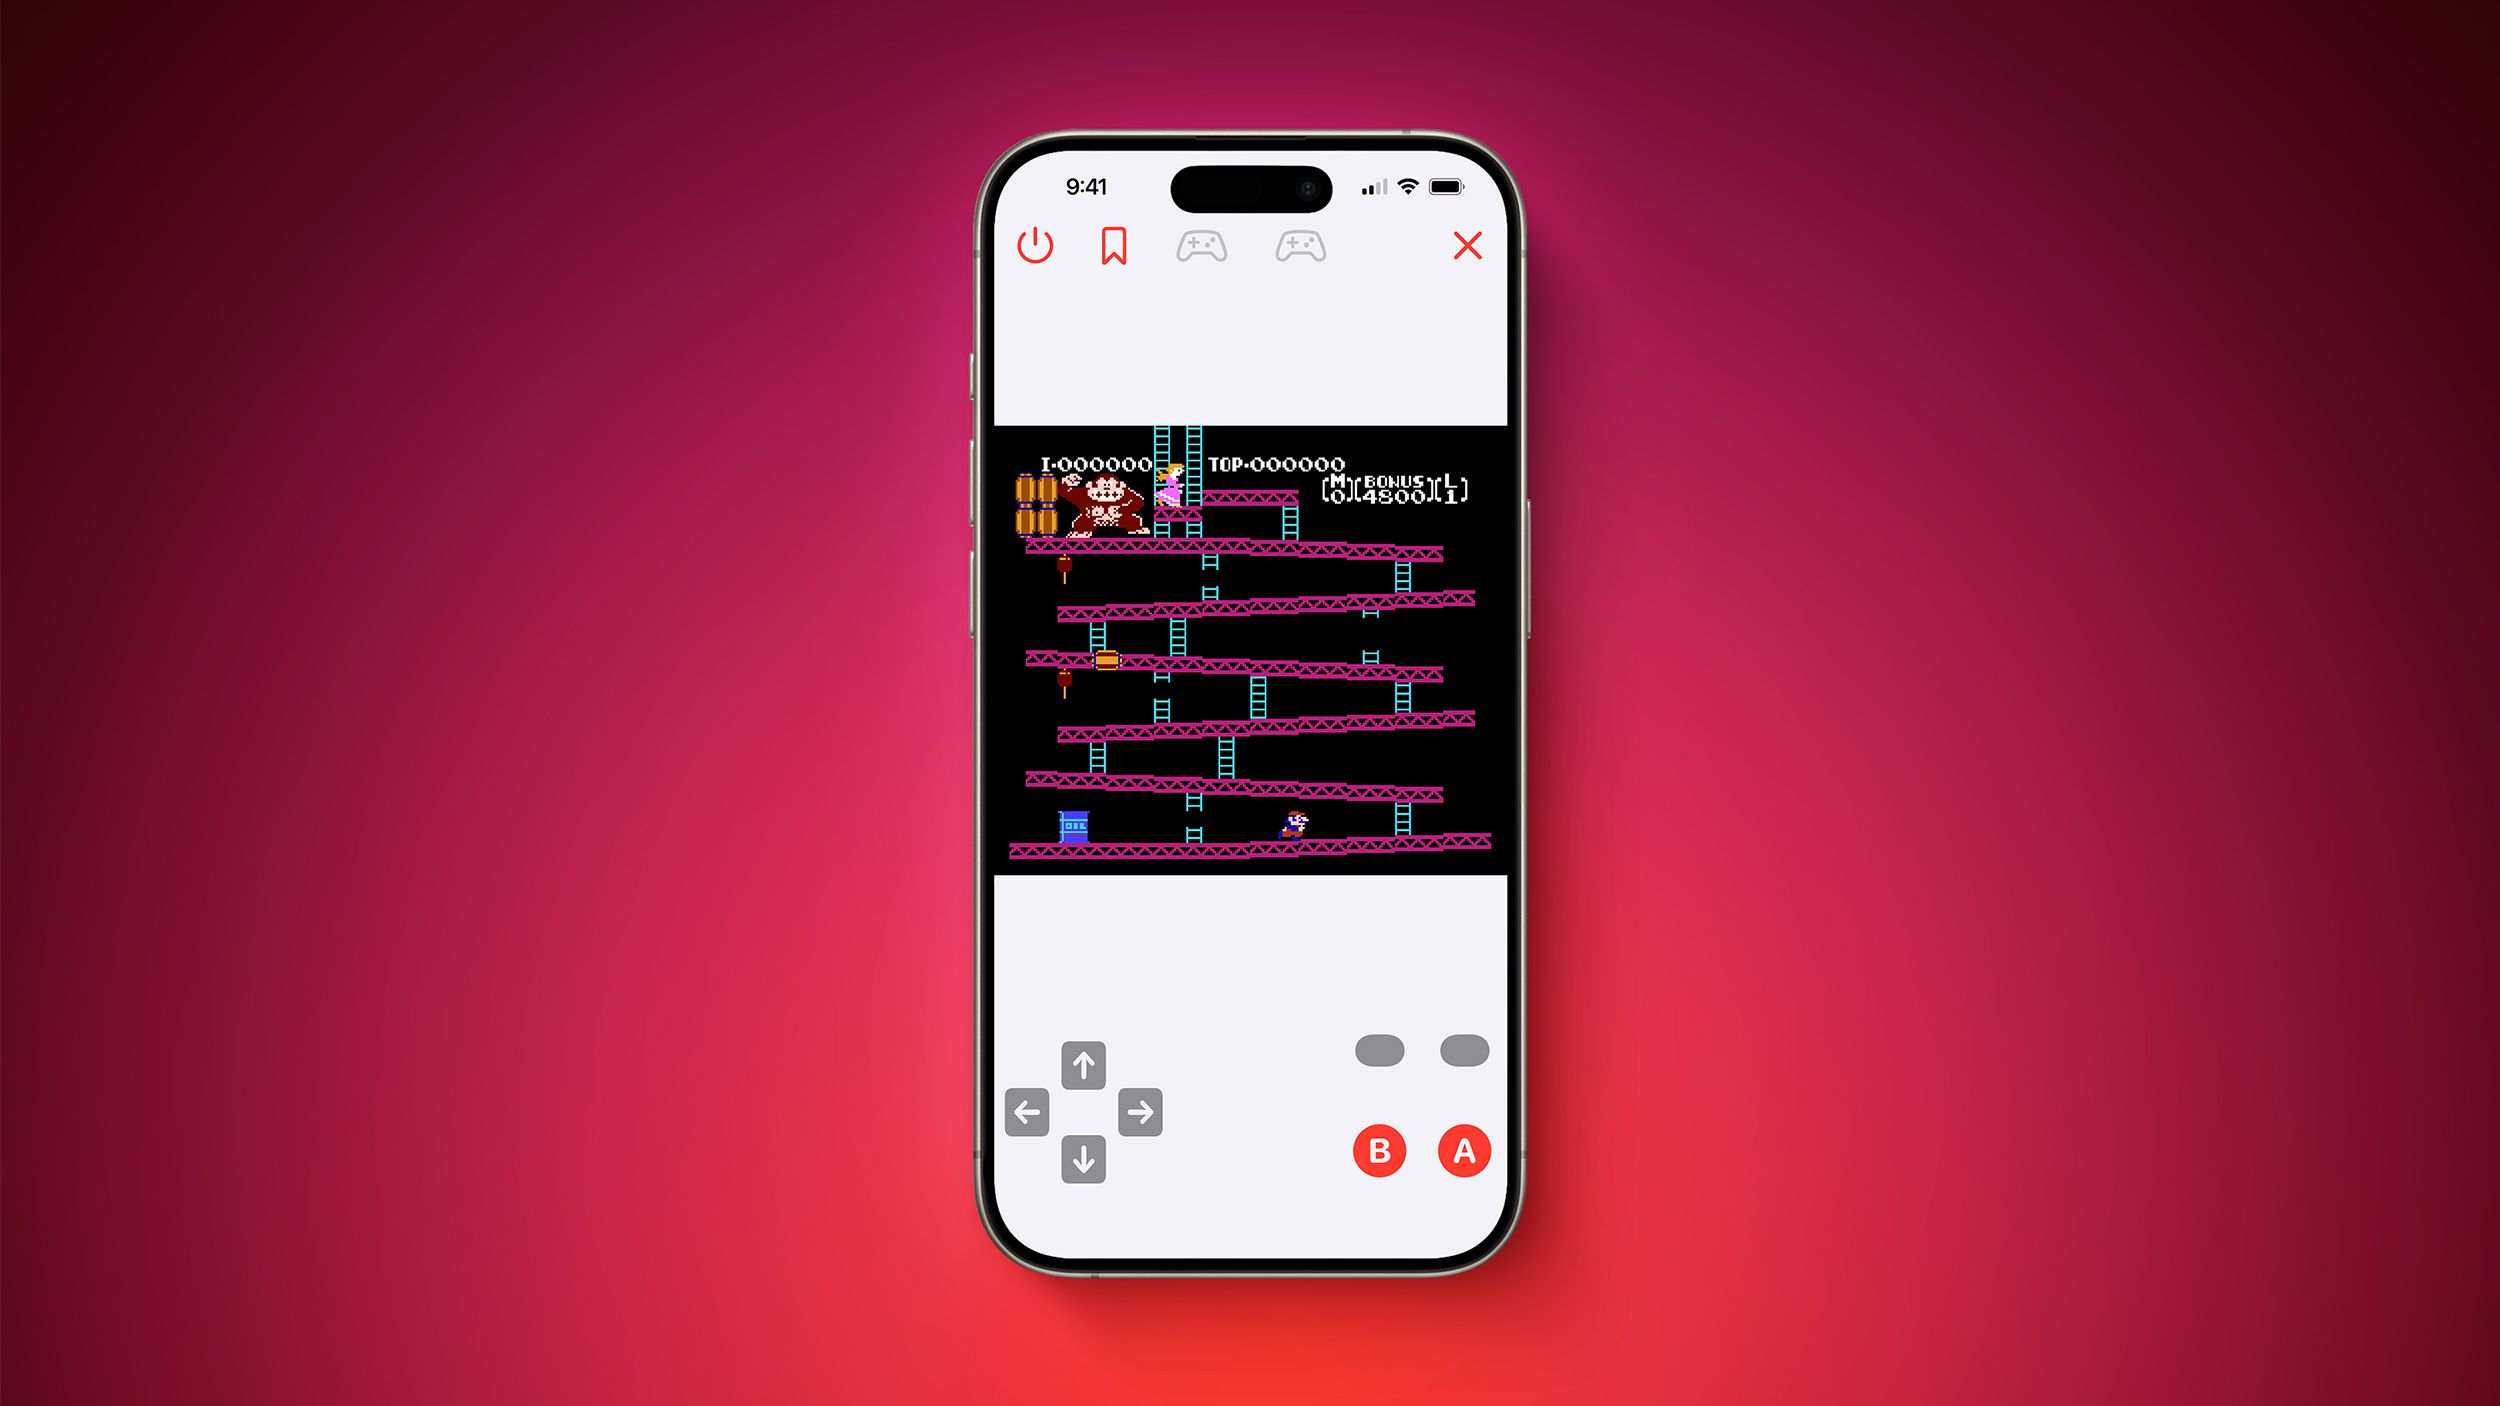 The first approved Nintendo Entertainment System (NES) emulator for the iPhone and iPad was made available on the App Store today following Apple's ru